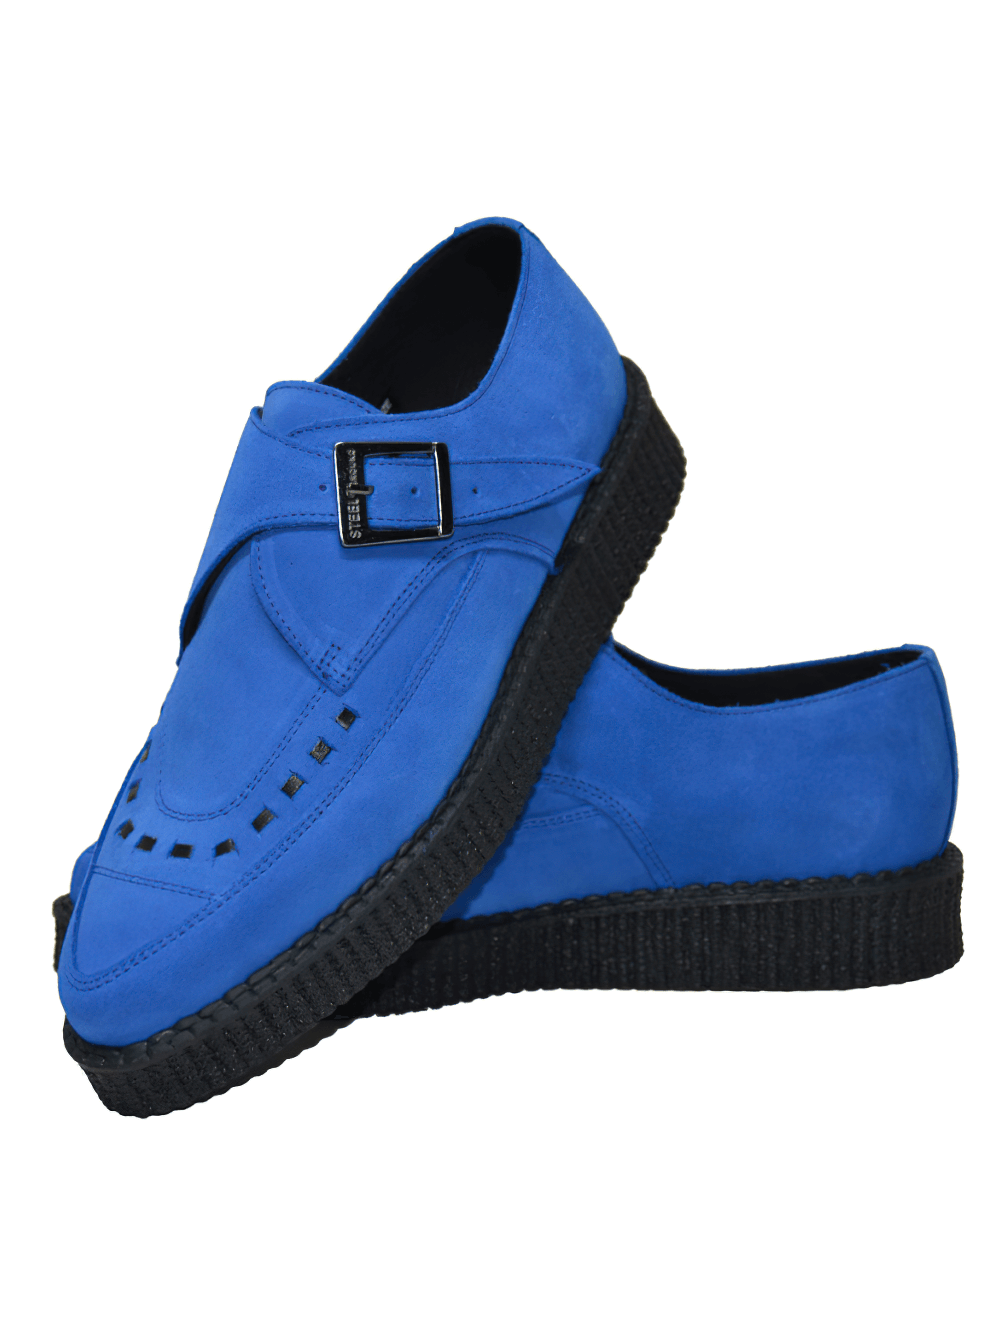 Unisex Suede Pointed Creepers with Buckle Closure